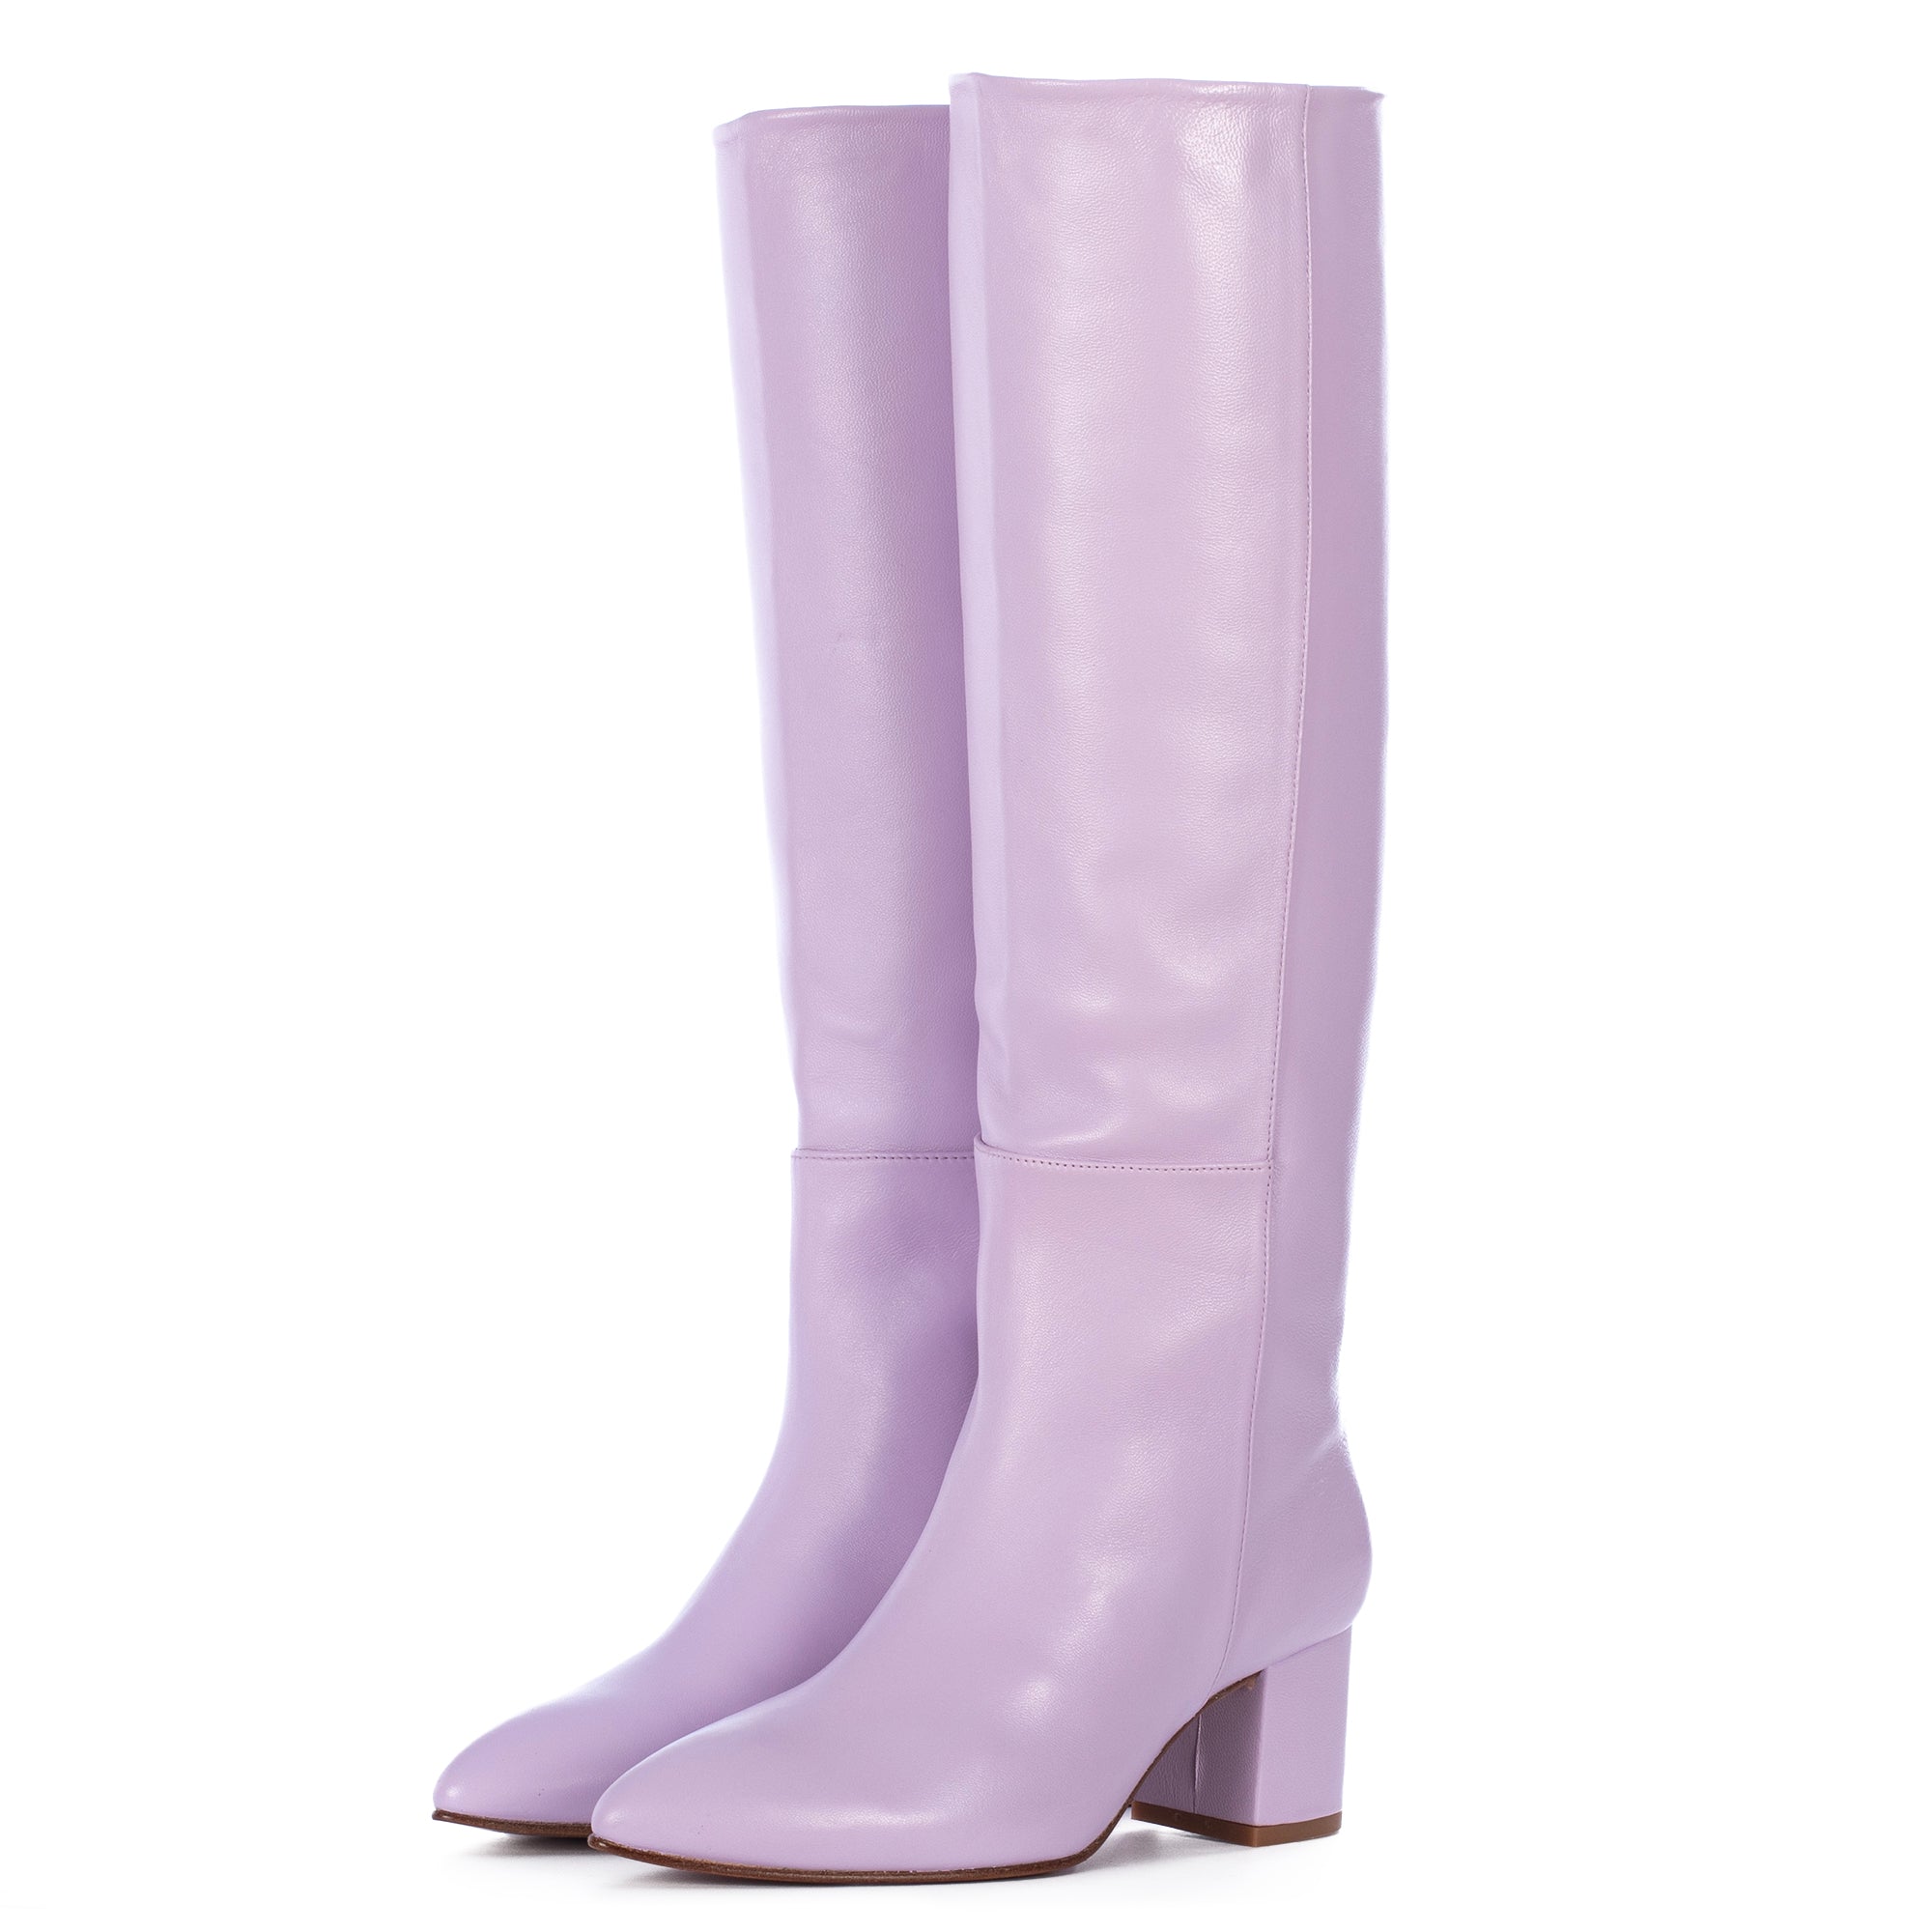 MAUVE LEATHER TALL BOOTS – Toral